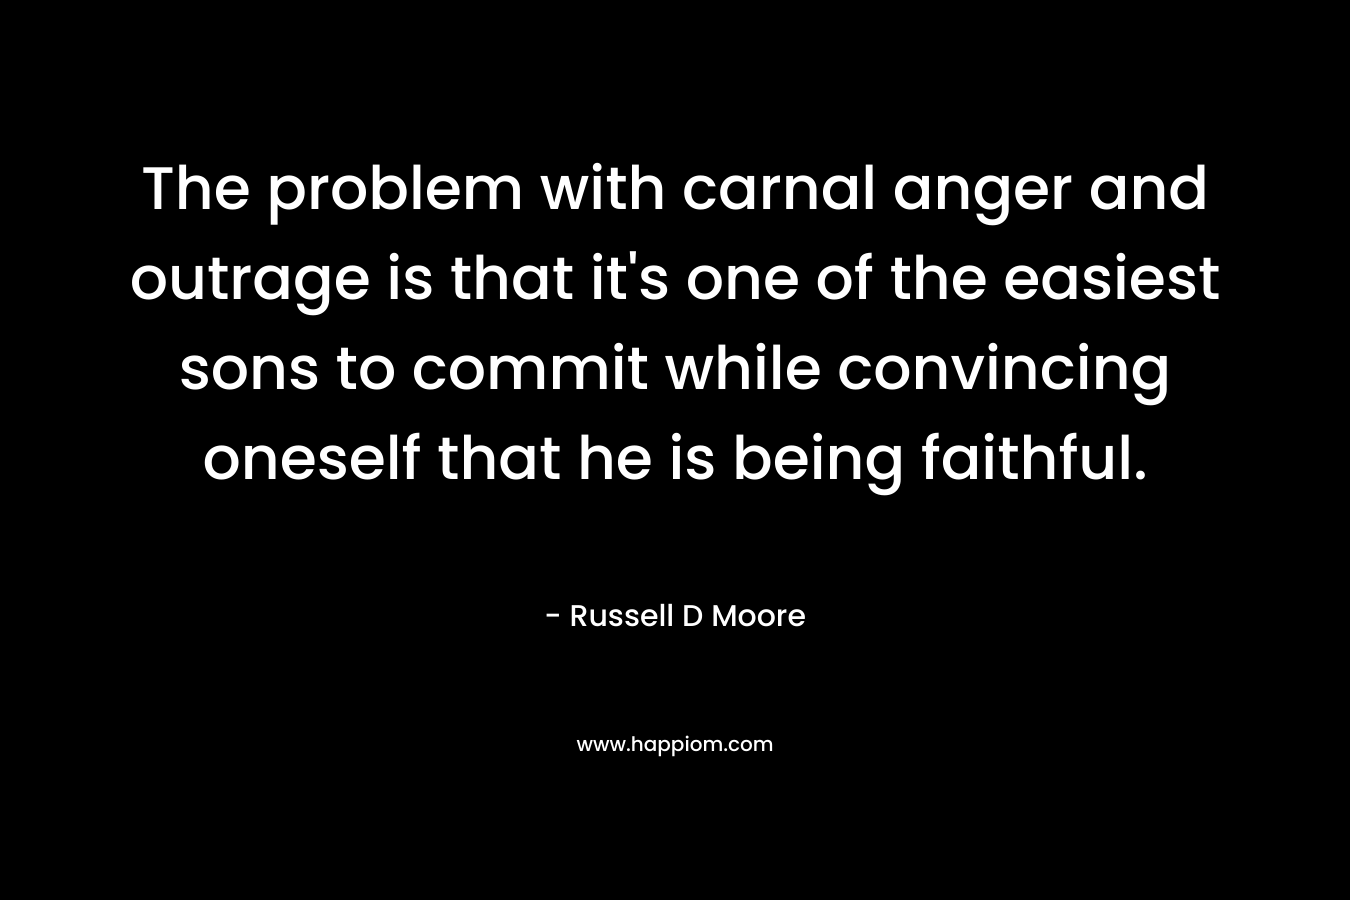 The problem with carnal anger and outrage is that it’s one of the easiest sons to commit while convincing oneself that he is being faithful. – Russell D Moore